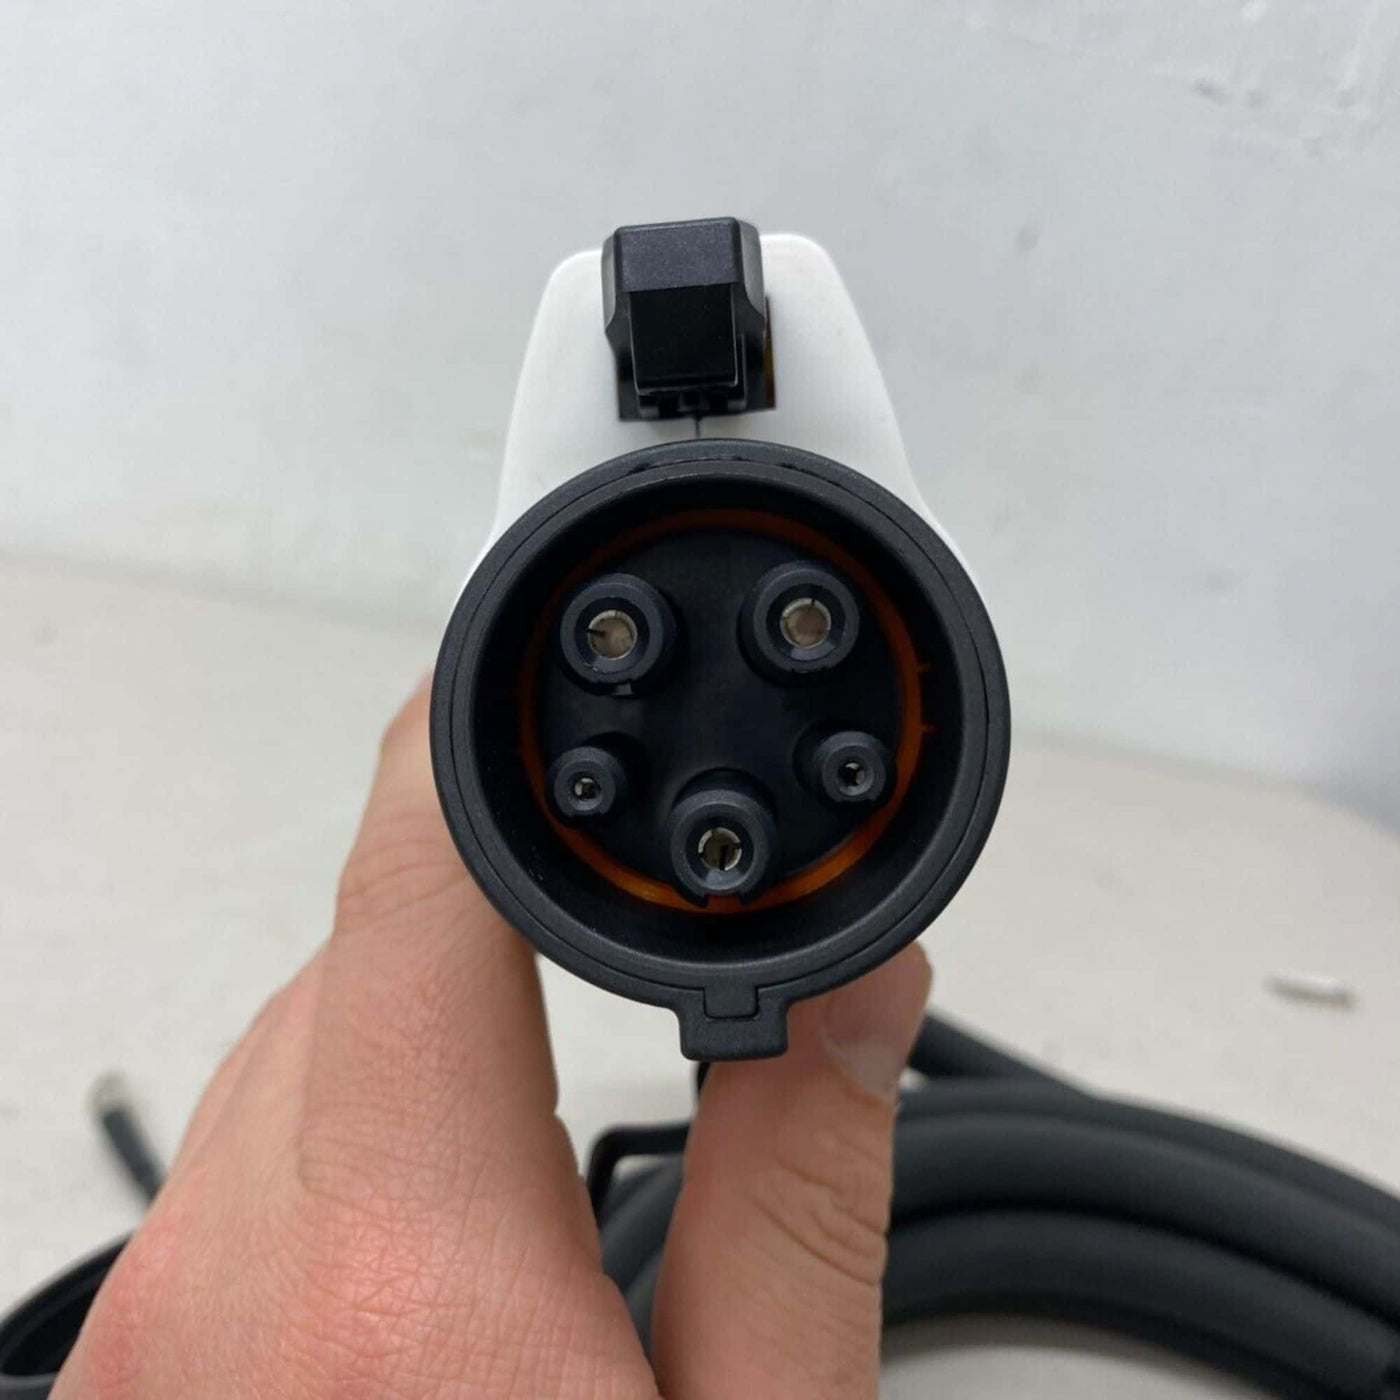 50 A SAE J1772-2010 AC Pile End EV Charging Plug_Connector Level 2 Type 1, 240V with a cord Image size 2000x2000 Front View